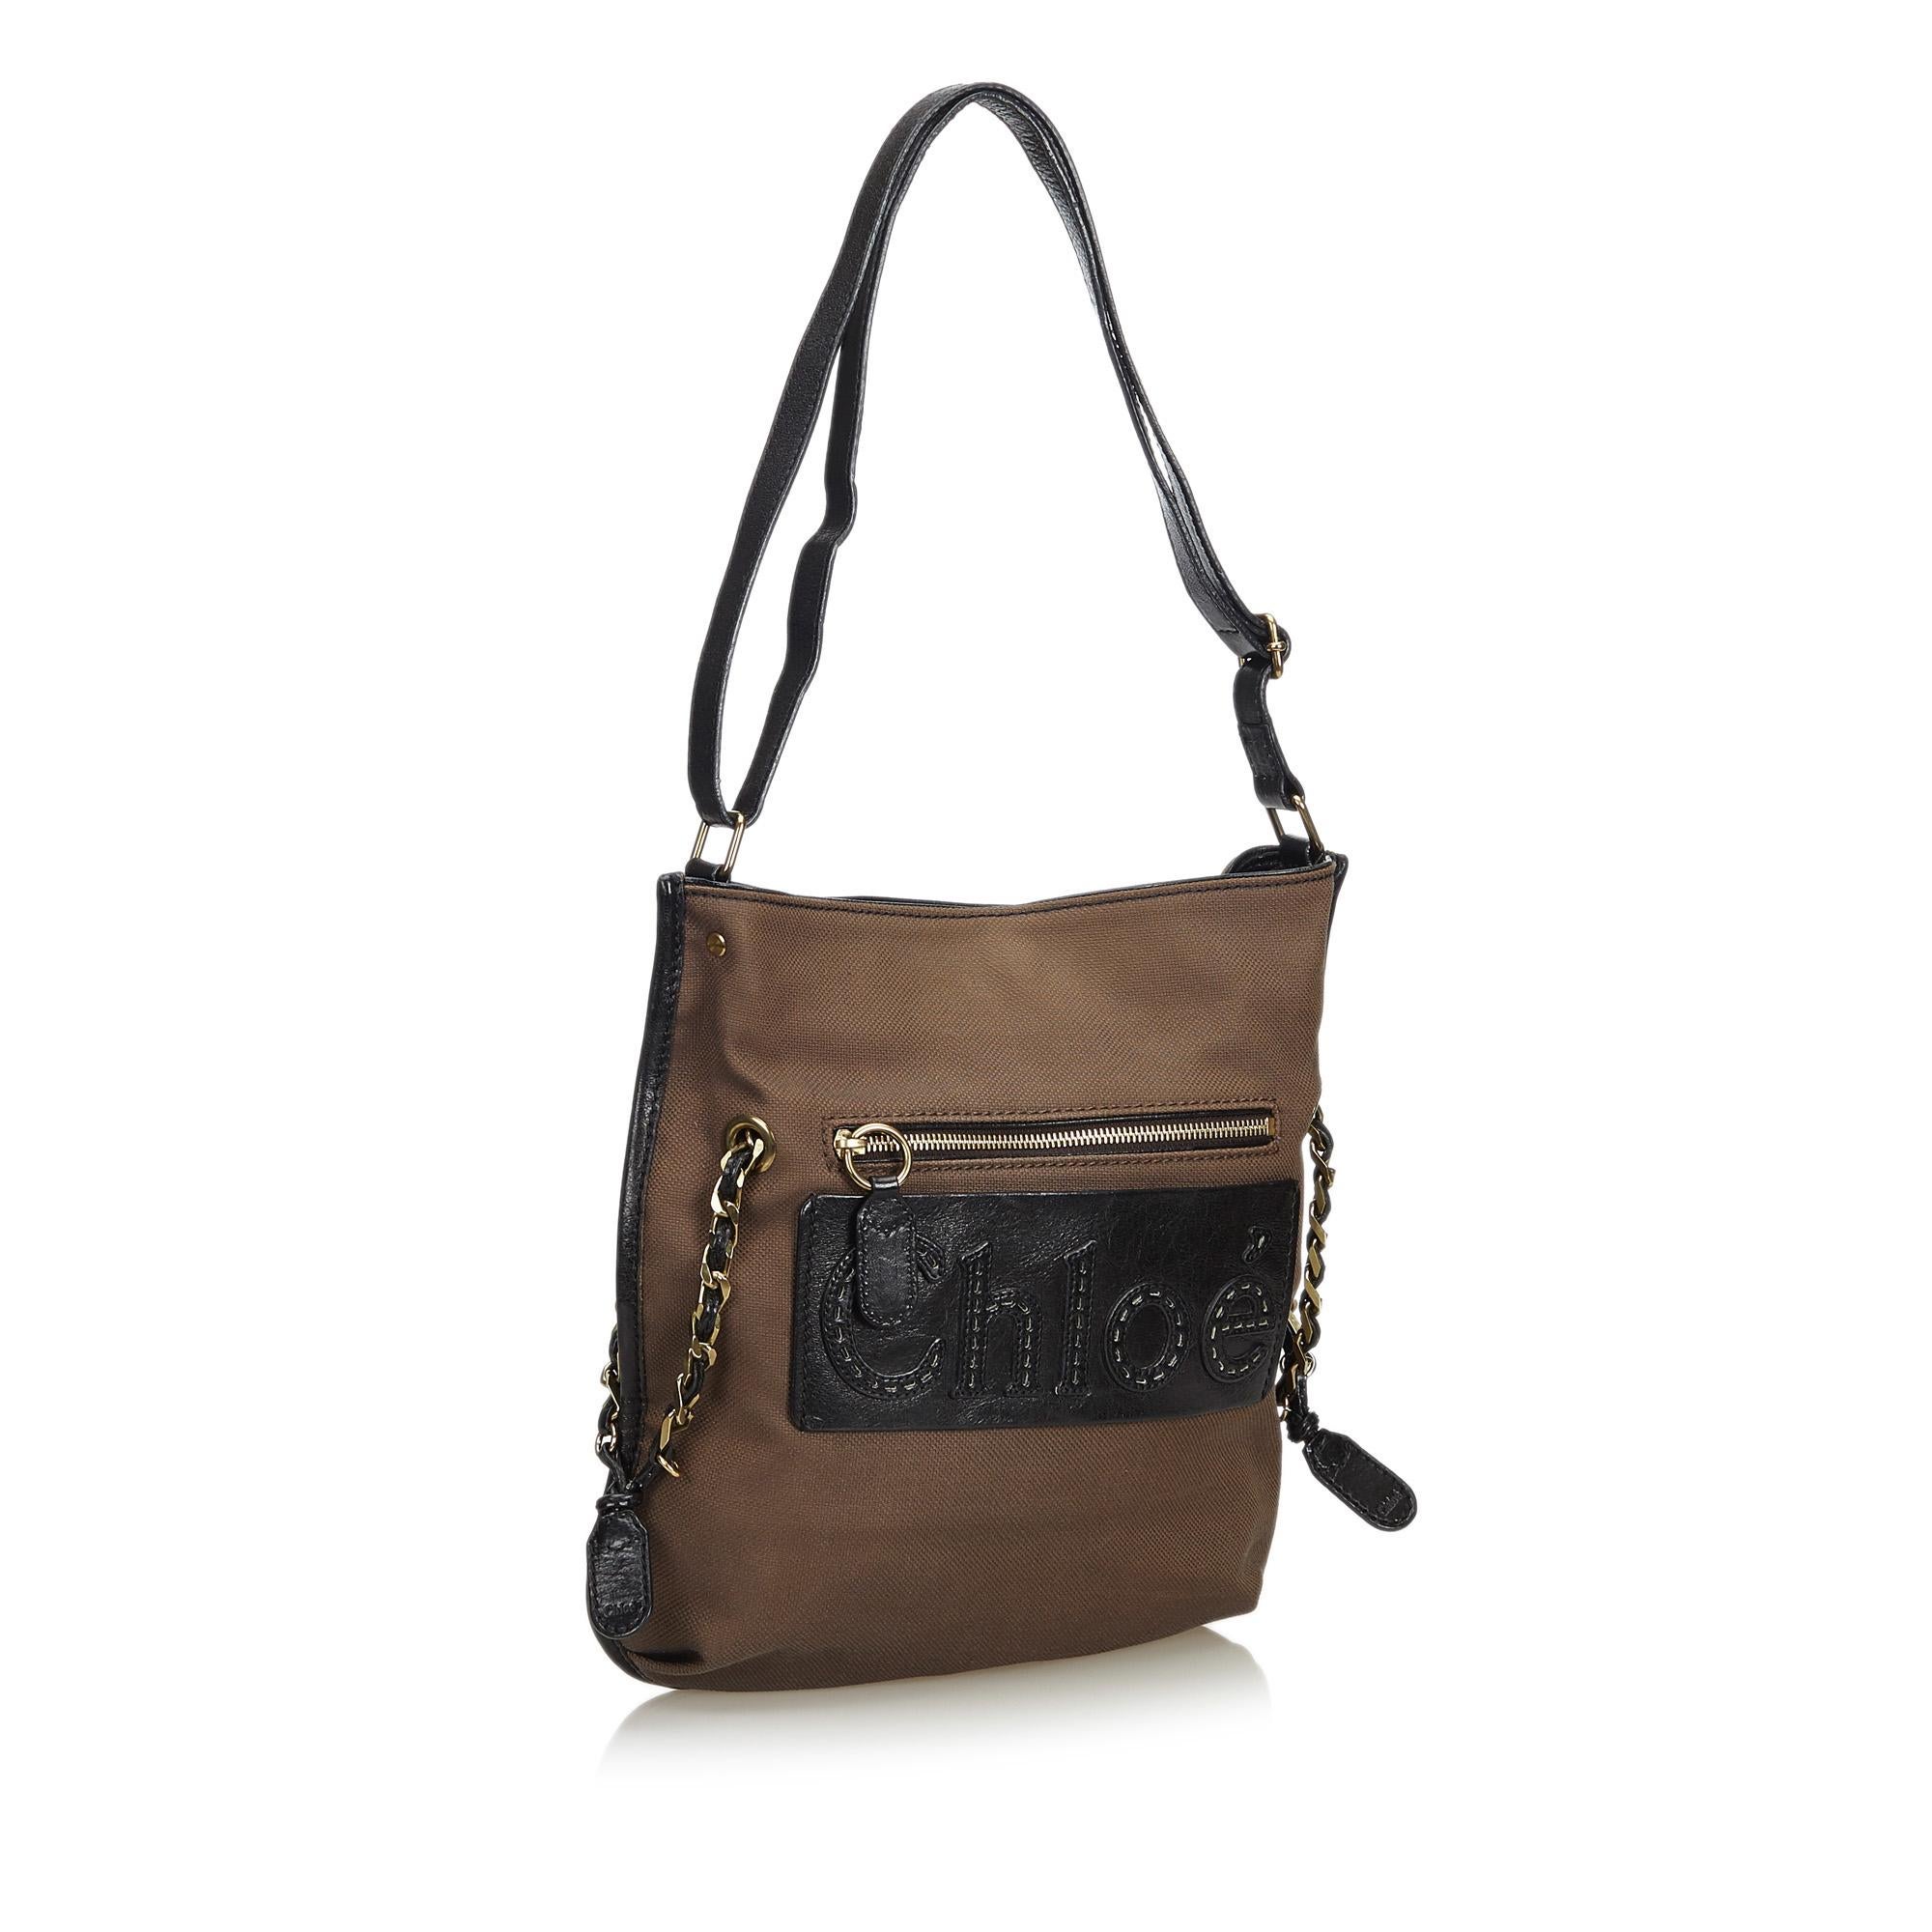 This shoulder bag features a canvas body with leather trim, a flat leather strap, a top magnetic closure, and an interior slip pocket. It carries as AB condition rating.

Inclusions: 
Dust Bag

Dimensions:
Length: 36.00 cm
Width: 35.00 cm
Depth: